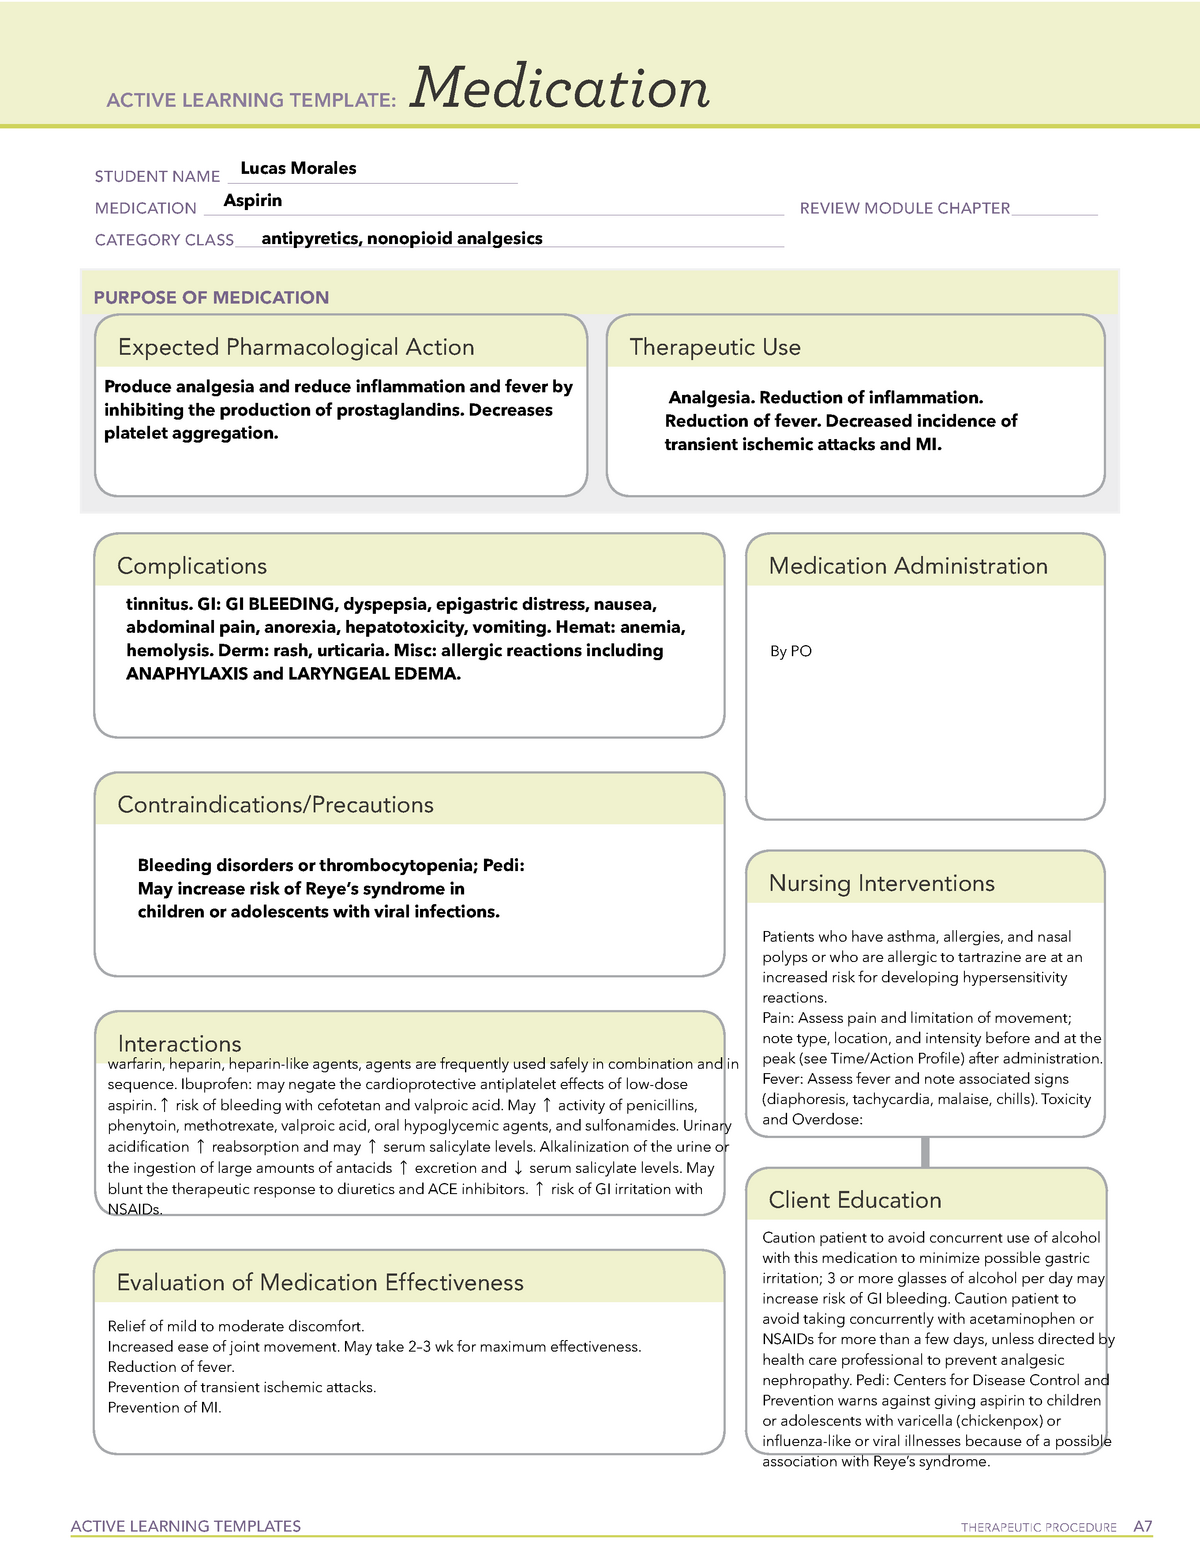 aspirin-med-ati-active-learning-templates-therapeutic-procedure-a